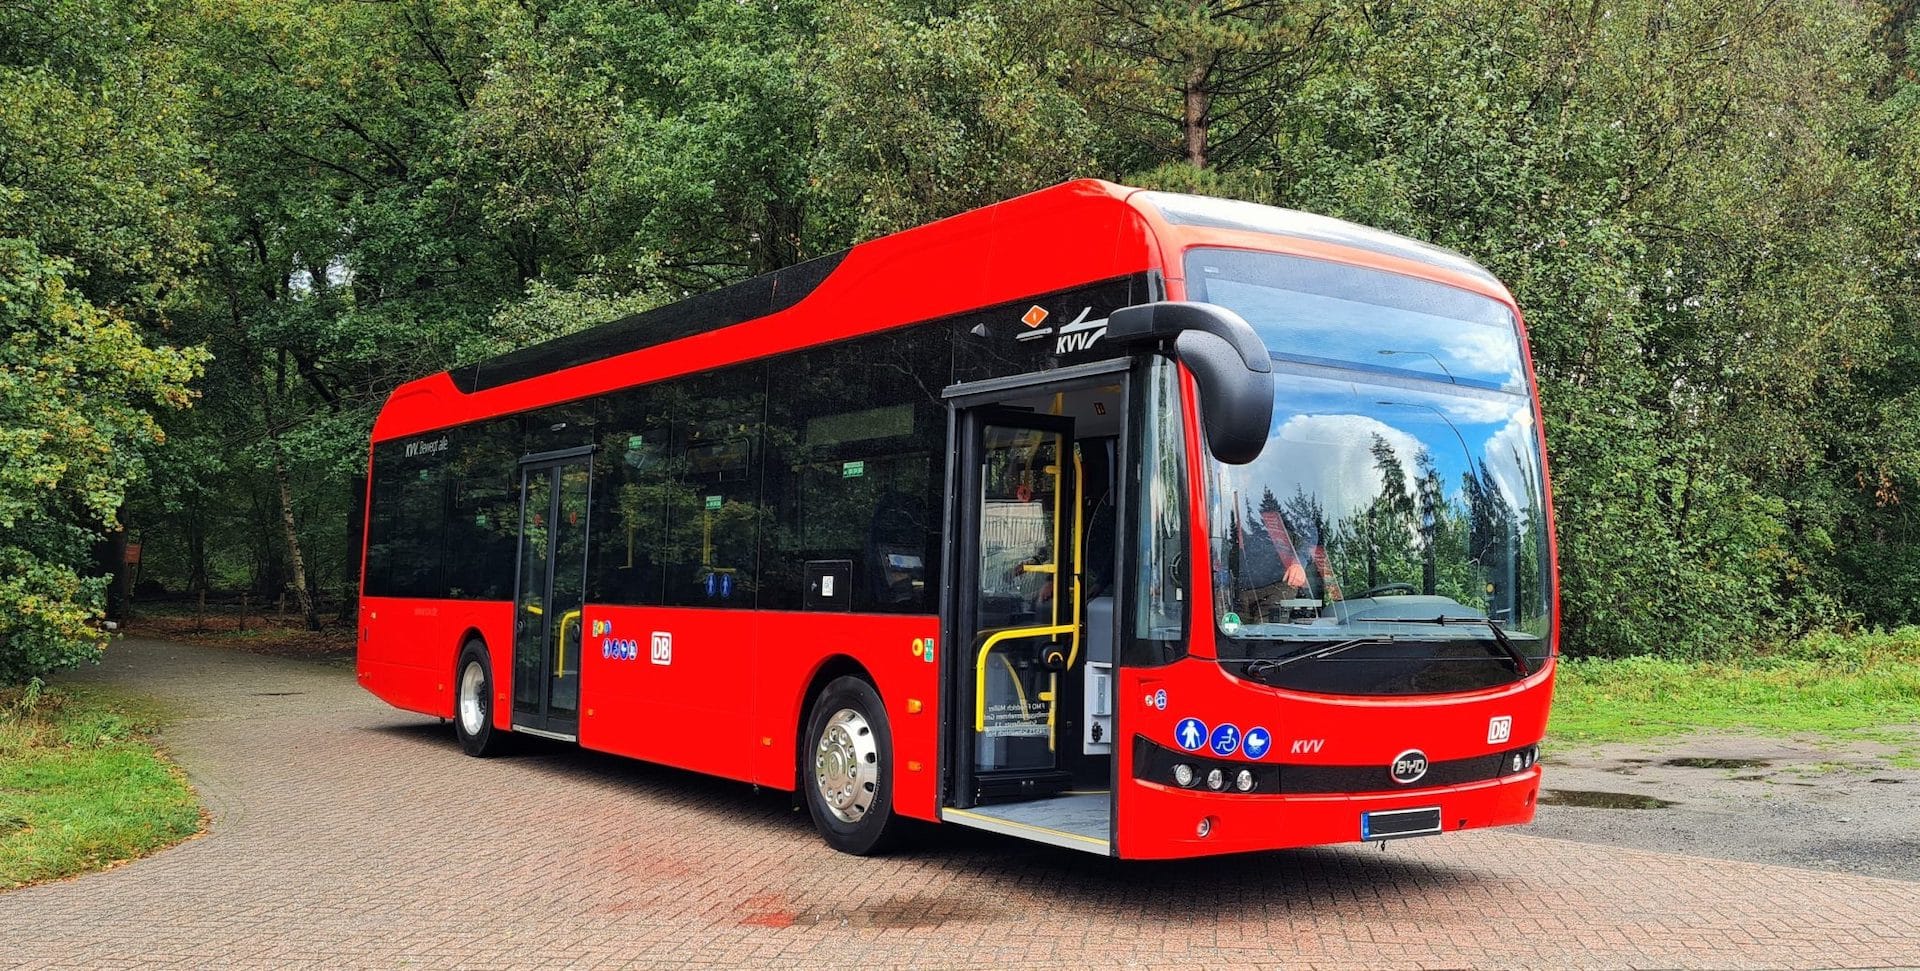 BYD new generation electric buses delivered to Deutsche Bahn in Germany